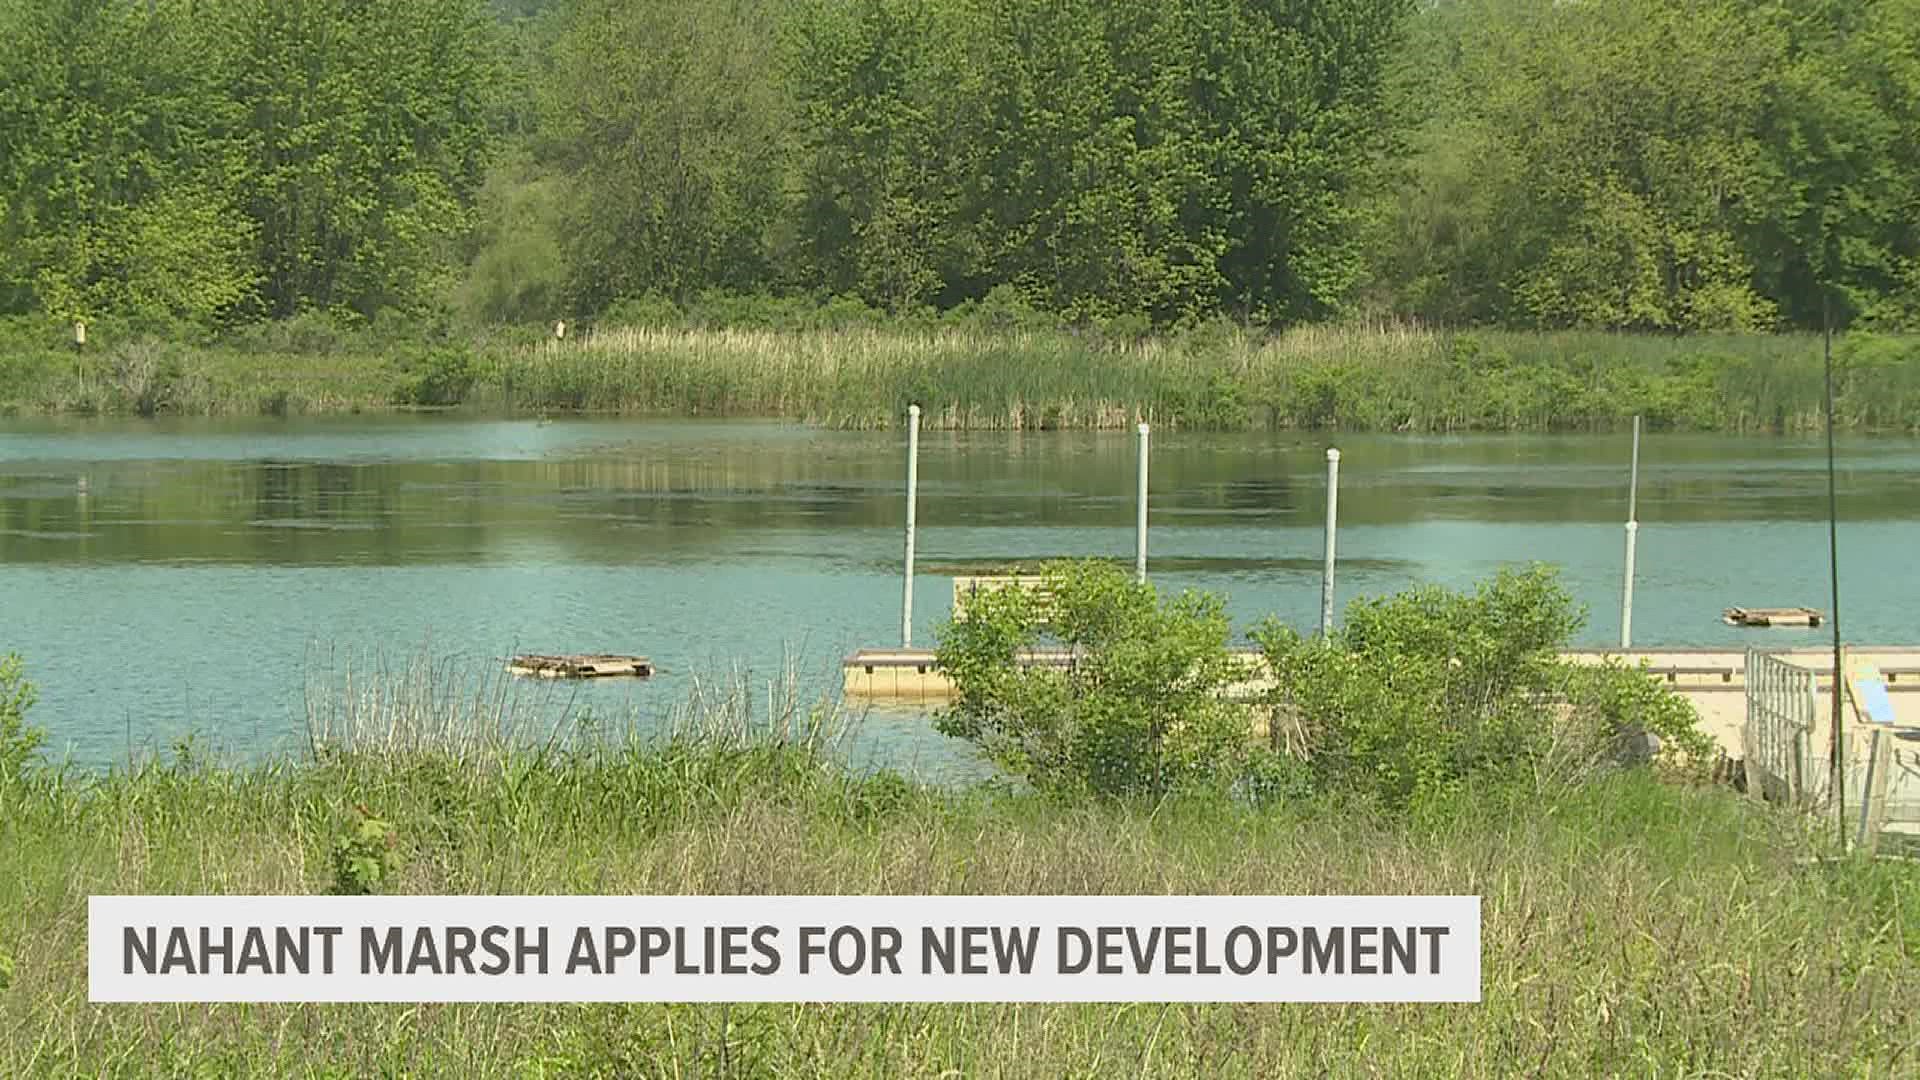 If approved by the city council, Nahant Marsh will apply for $1 million state grant to start construction on 60 acres of land surrounding the marsh.